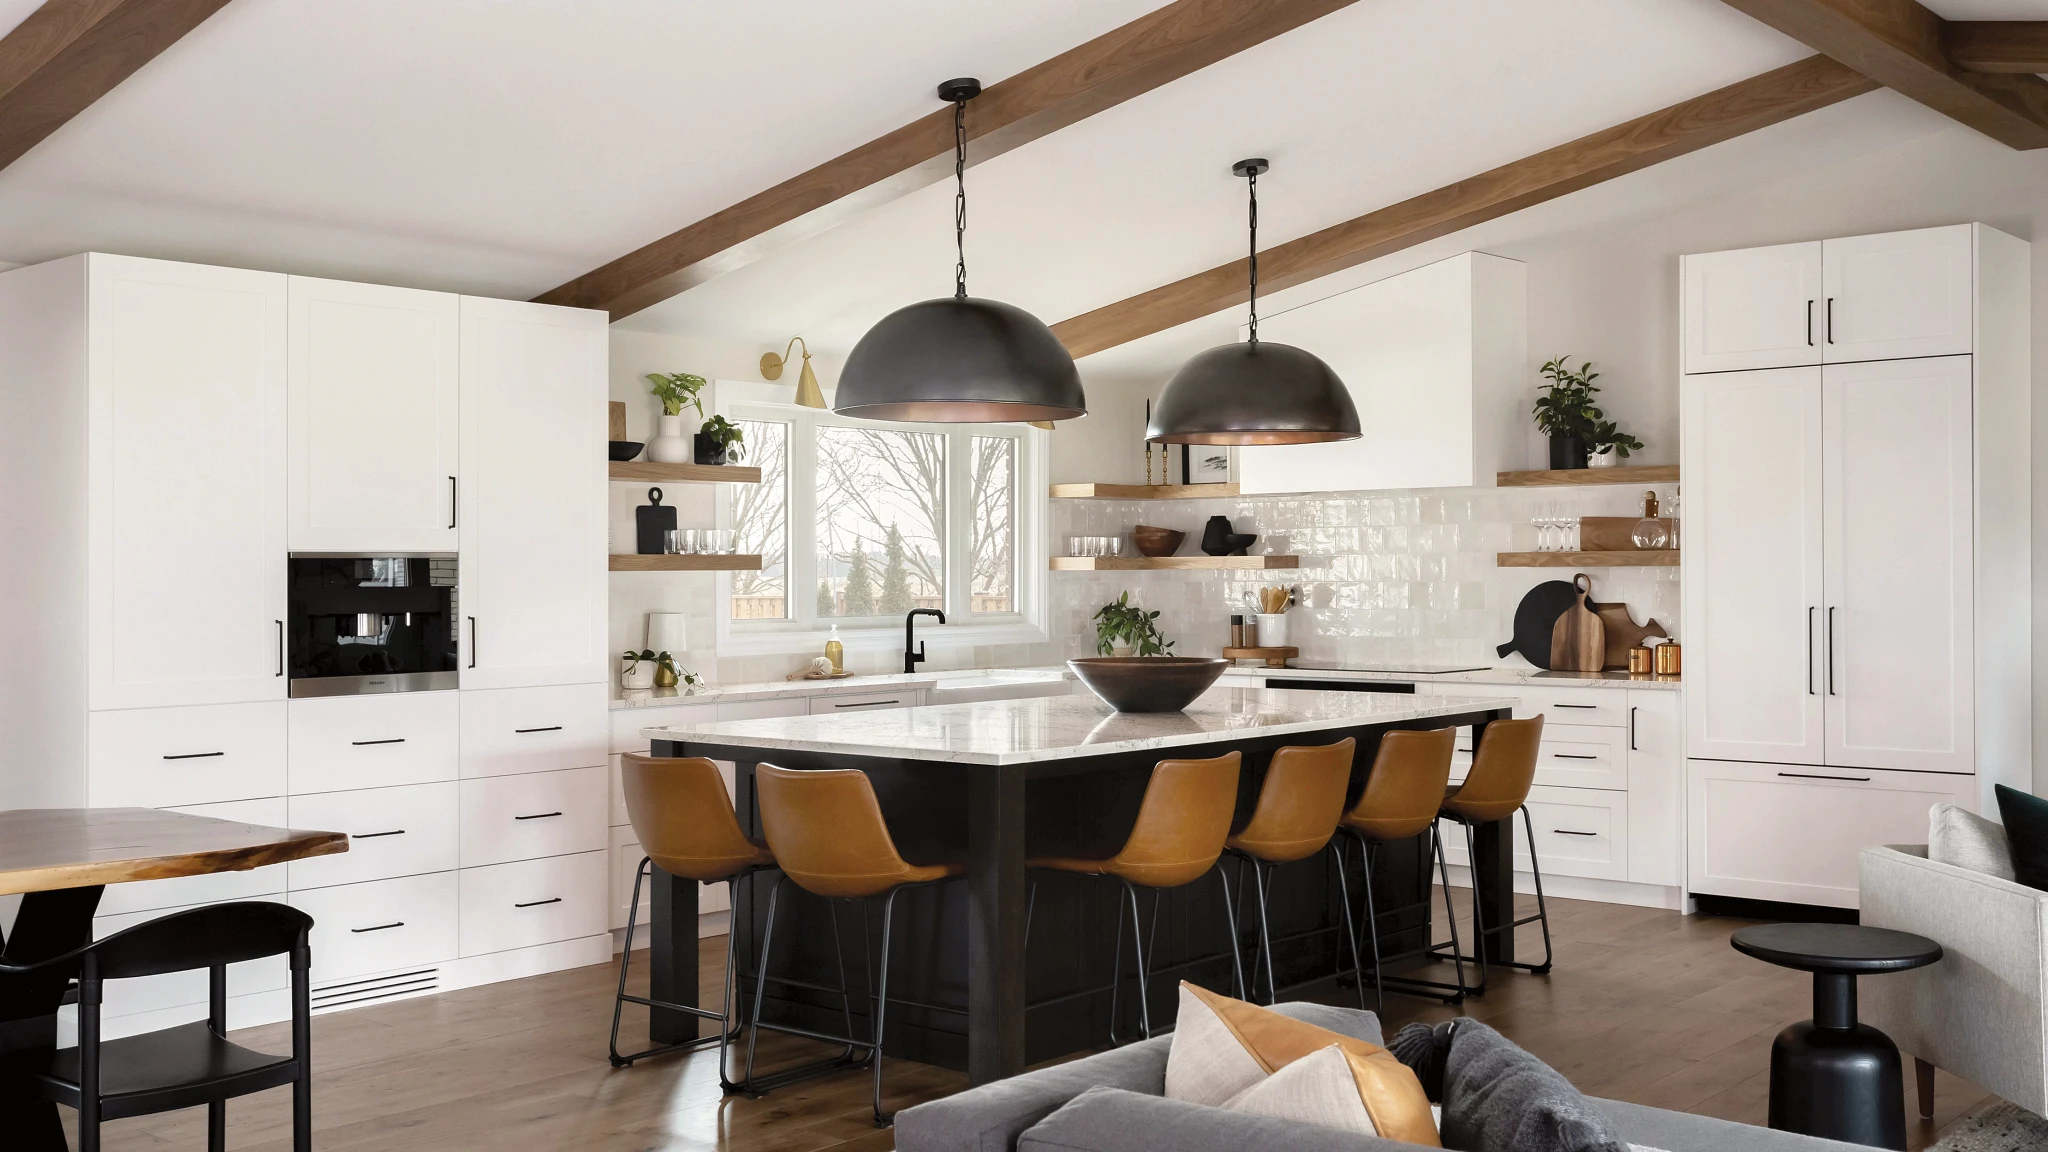 a warm and white kitchen with white cabinets, open wooden shelving, vaulted ceilings with wooden beams, and a black center island topped with white quartz countertops and 6 wooden and black bar stools surrounding it.